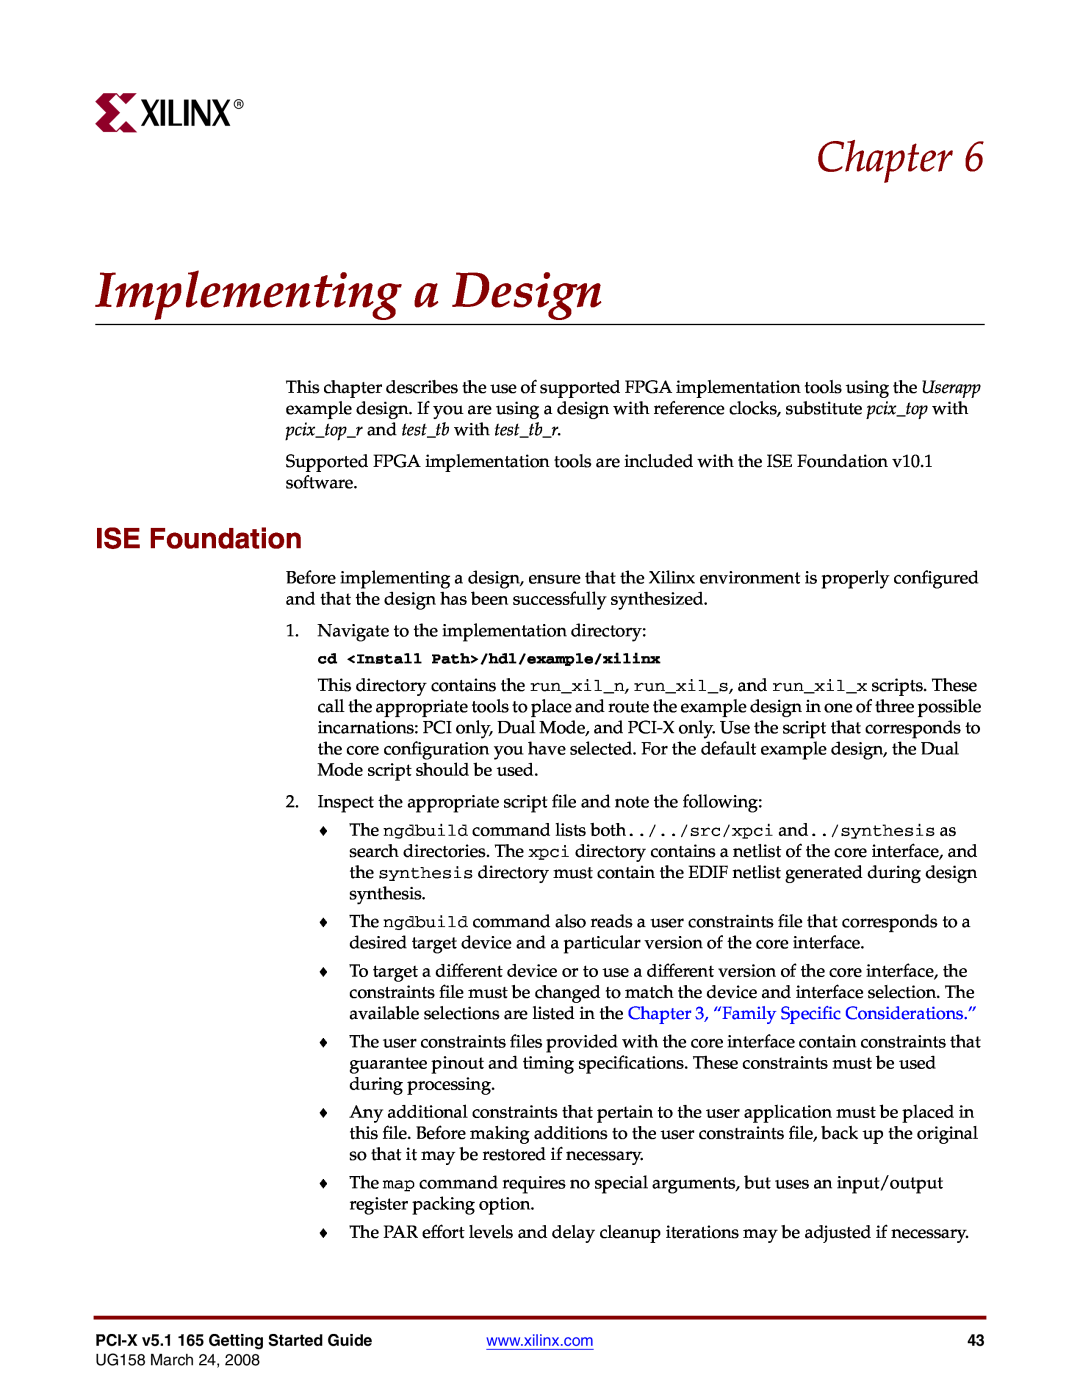 Xilinx PCI-X v5.1 manual Implementing a Design, ISE Foundation, Chapter 